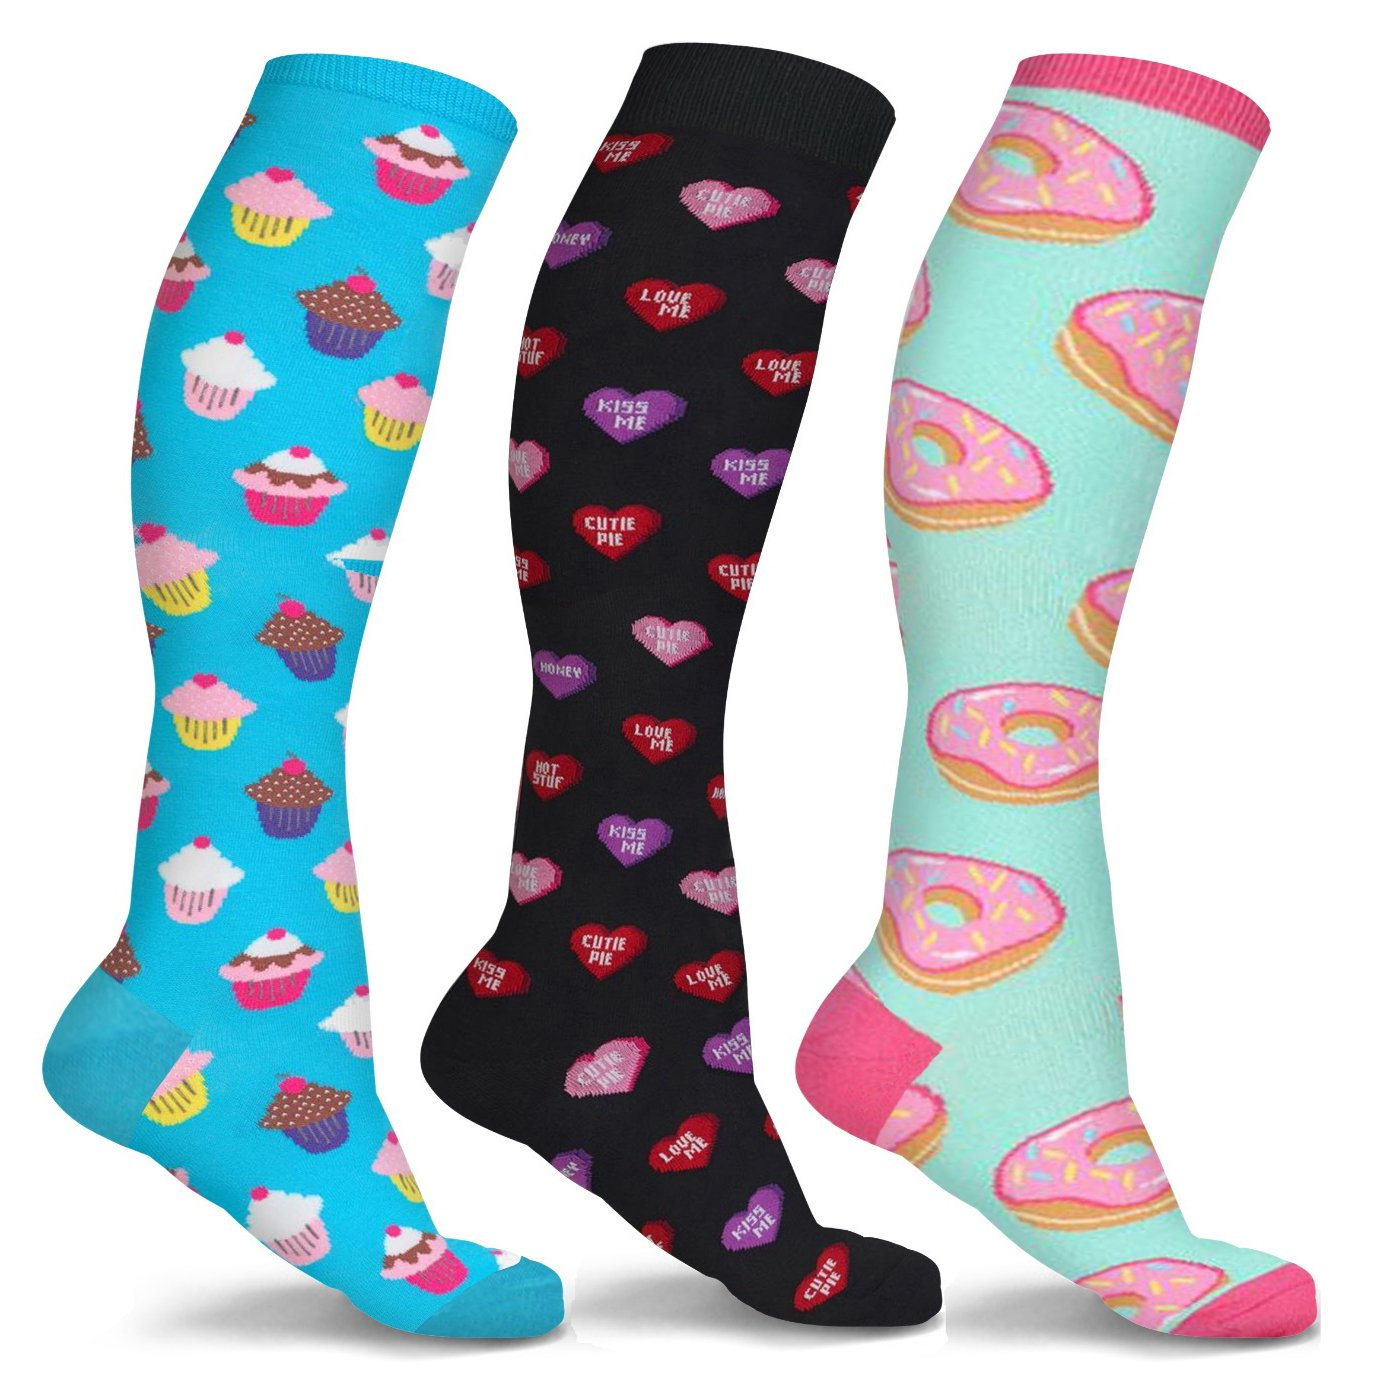 3-Pairs: Dcf Uni Fun And Patterned Knee-High destiné Compression Socks Walmart